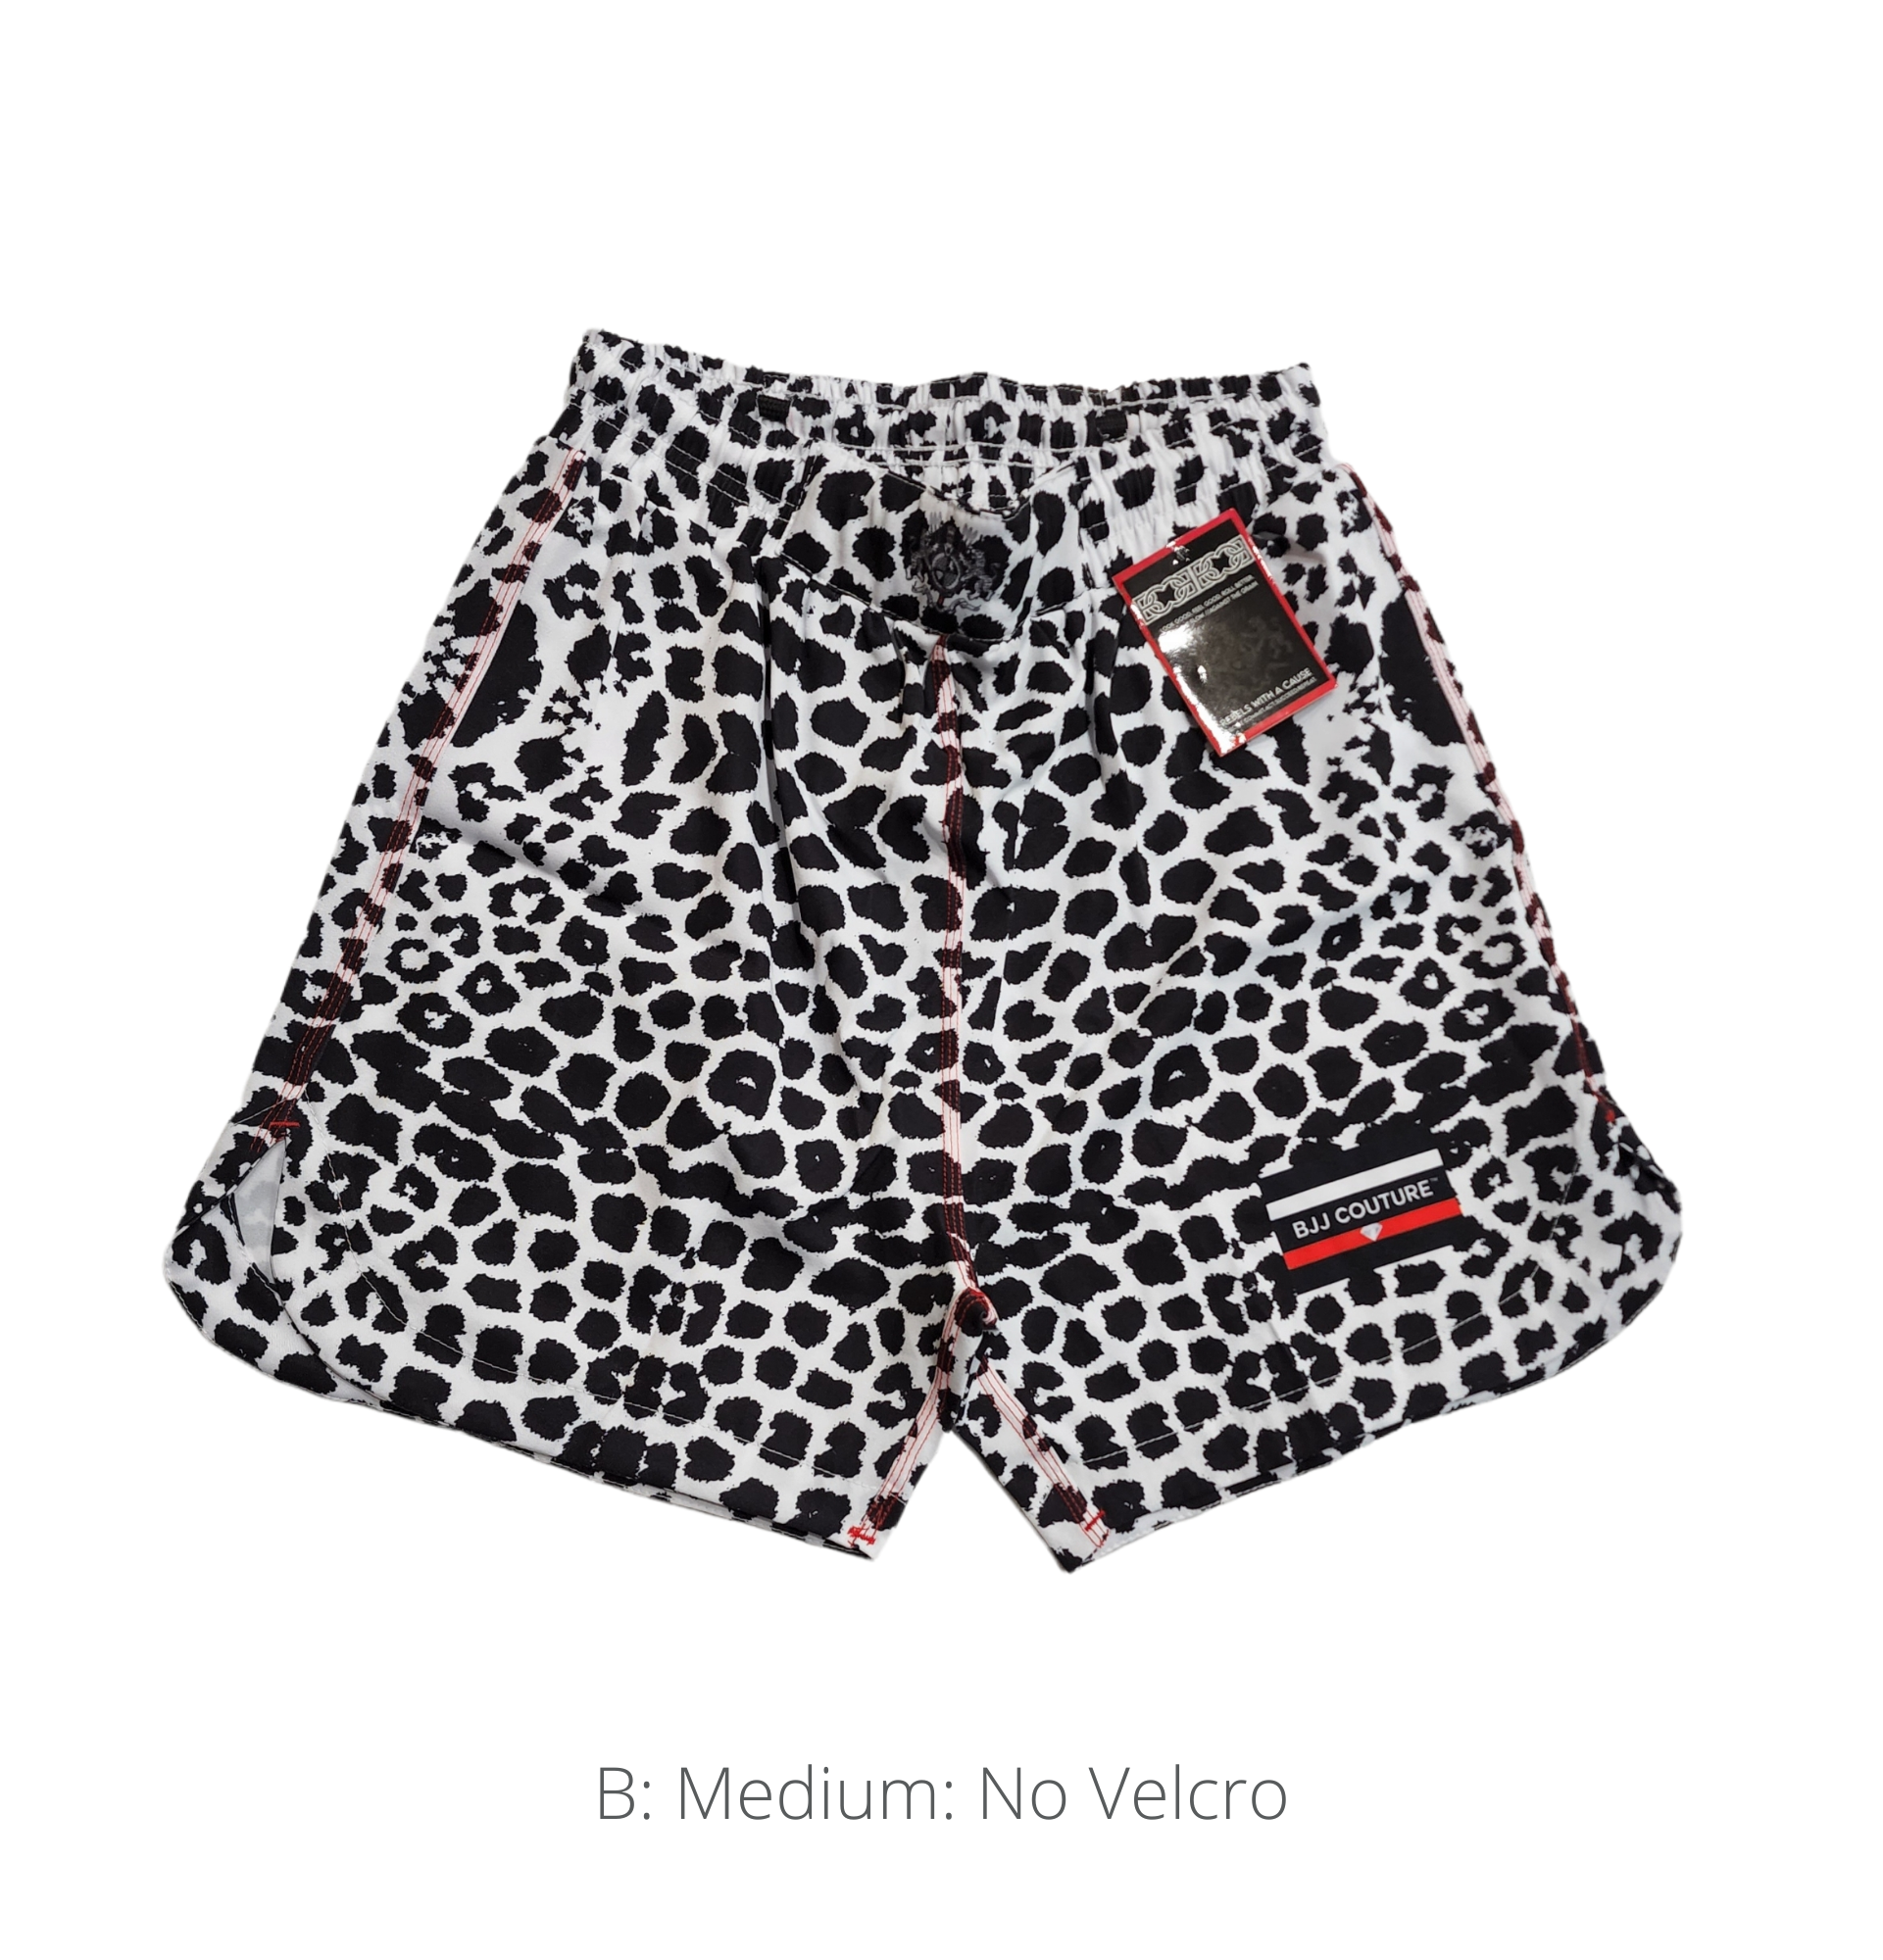 HOT人気 Supreme - Supreme Leopard Water Short XLの通販 by sup56's